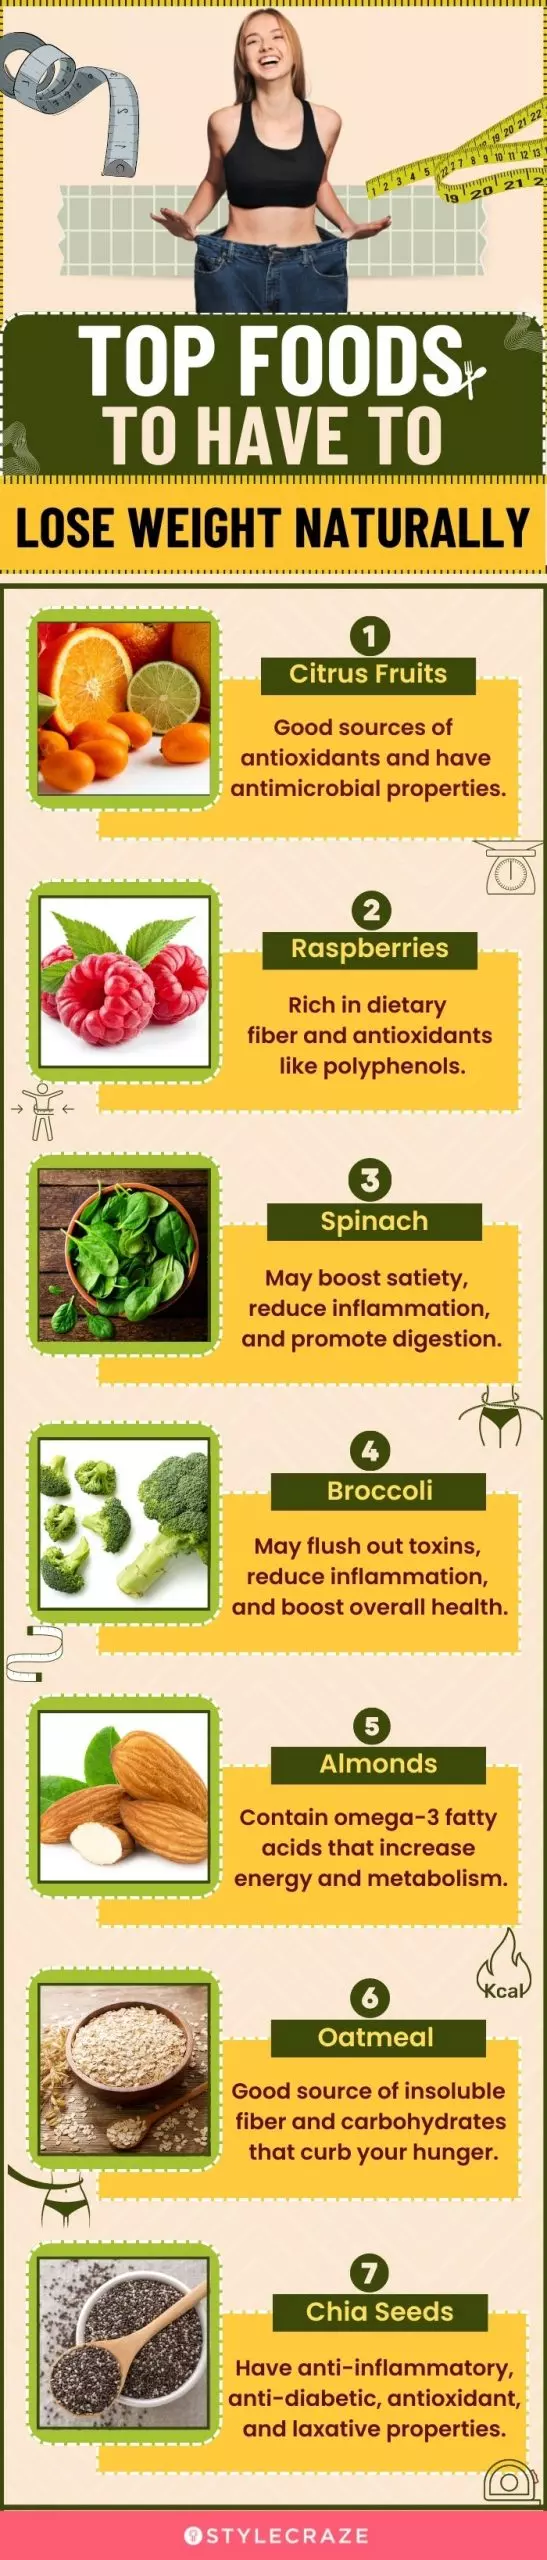 top food for weight lose naturally(infographic)